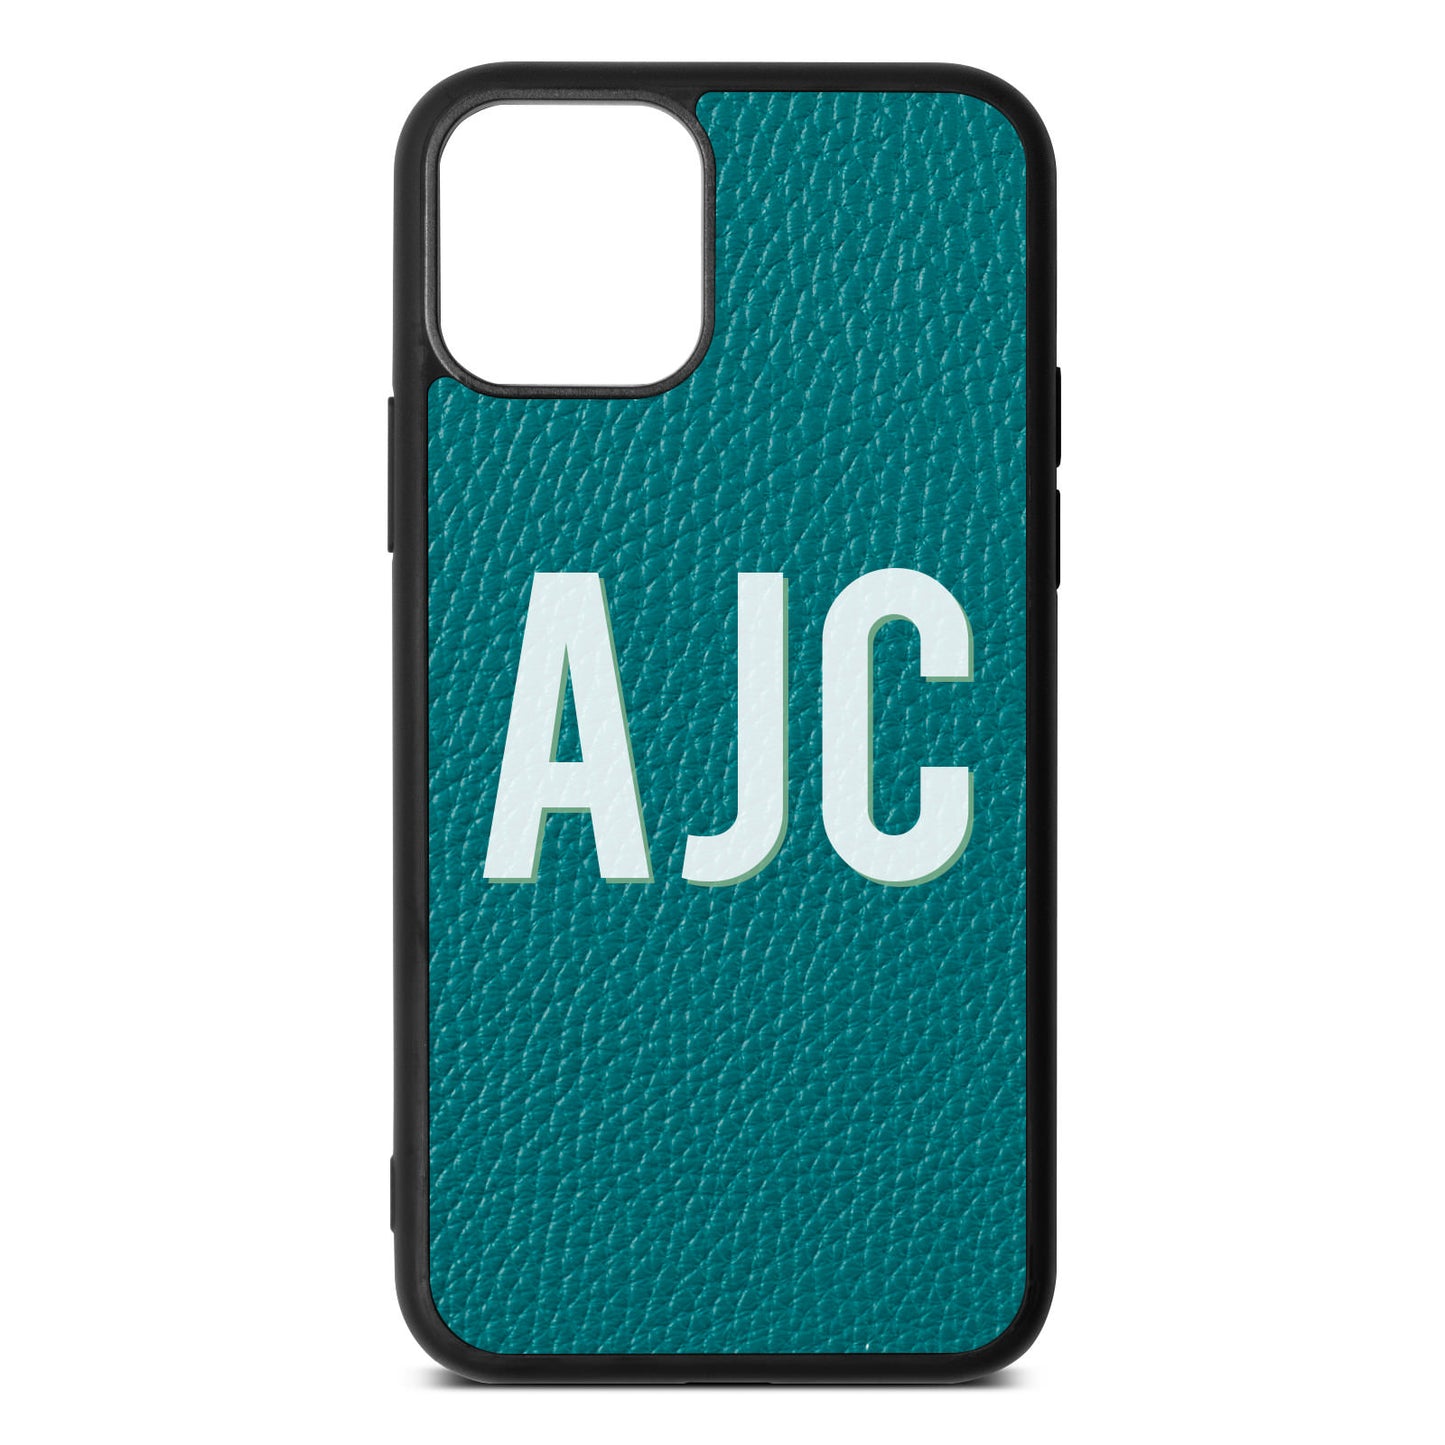 iPhone 11 Pro Pebble Green Leather iPhone Case